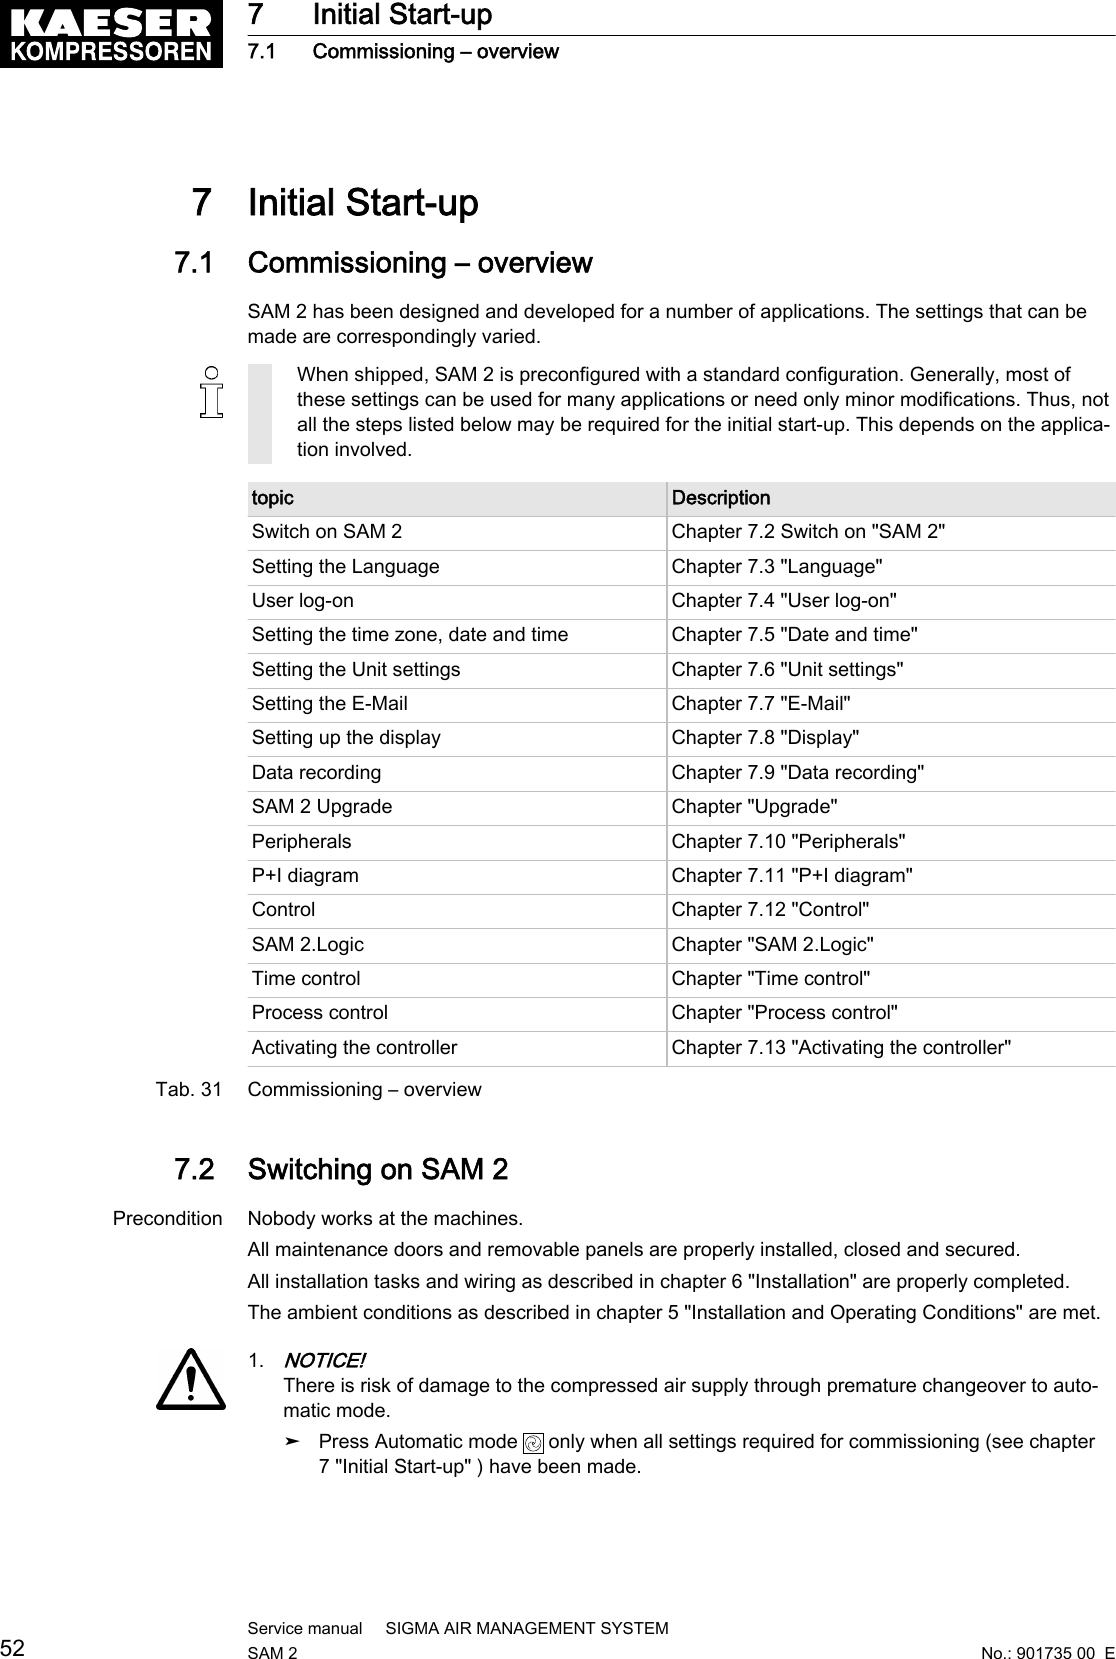 7  Initial Start-up7.1  Commissioning – overviewSAM 2 has been designed and developed for a number of applications. The settings that can bemade are correspondingly varied.When shipped, SAM 2 is preconfigured with a standard configuration. Generally, most ofthese settings can be used for many applications or need only minor modifications. Thus, notall the steps listed below may be required for the initial start-up. This depends on the applica‐tion involved.topic DescriptionSwitch on SAM 2 Chapter 7.2 Switch on &quot;SAM 2&quot;Setting the Language Chapter 7.3 &quot;Language&quot;User log-on Chapter 7.4 &quot;User log-on&quot;Setting the time zone, date and time Chapter 7.5 &quot;Date and time&quot;Setting the Unit settings Chapter 7.6 &quot;Unit settings&quot;Setting the E-Mail Chapter 7.7 &quot;E-Mail&quot;Setting up the display Chapter 7.8 &quot;Display&quot;Data recording Chapter 7.9 &quot;Data recording&quot;SAM 2 Upgrade Chapter &quot;Upgrade&quot;Peripherals Chapter 7.10 &quot;Peripherals&quot;P+I diagram Chapter 7.11 &quot;P+I diagram&quot;Control Chapter 7.12 &quot;Control&quot;SAM 2.Logic Chapter &quot;SAM 2.Logic&quot;Time control Chapter &quot;Time control&quot;Process control Chapter &quot;Process control&quot;Activating the controller Chapter 7.13 &quot;Activating the controller&quot;Tab. 31 Commissioning – overview7.2  Switching on SAM 2Precondition Nobody works at the machines.All maintenance doors and removable panels are properly installed, closed and secured.All installation tasks and wiring as described in chapter 6 &quot;Installation&quot; are properly completed.The ambient conditions as described in chapter 5 &quot;Installation and Operating Conditions&quot; are met.1.NOTICE! There is risk of damage to the compressed air supply through premature changeover to auto‐matic mode.➤ Press Automatic mode   only when all settings required for commissioning (see chapter7 &quot;Initial Start-up&quot; ) have been made.7 Initial Start-up7.1 Commissioning – overview52Service manual     SIGMA AIR MANAGEMENT SYSTEMSAM 2  No.: 901735 00  E